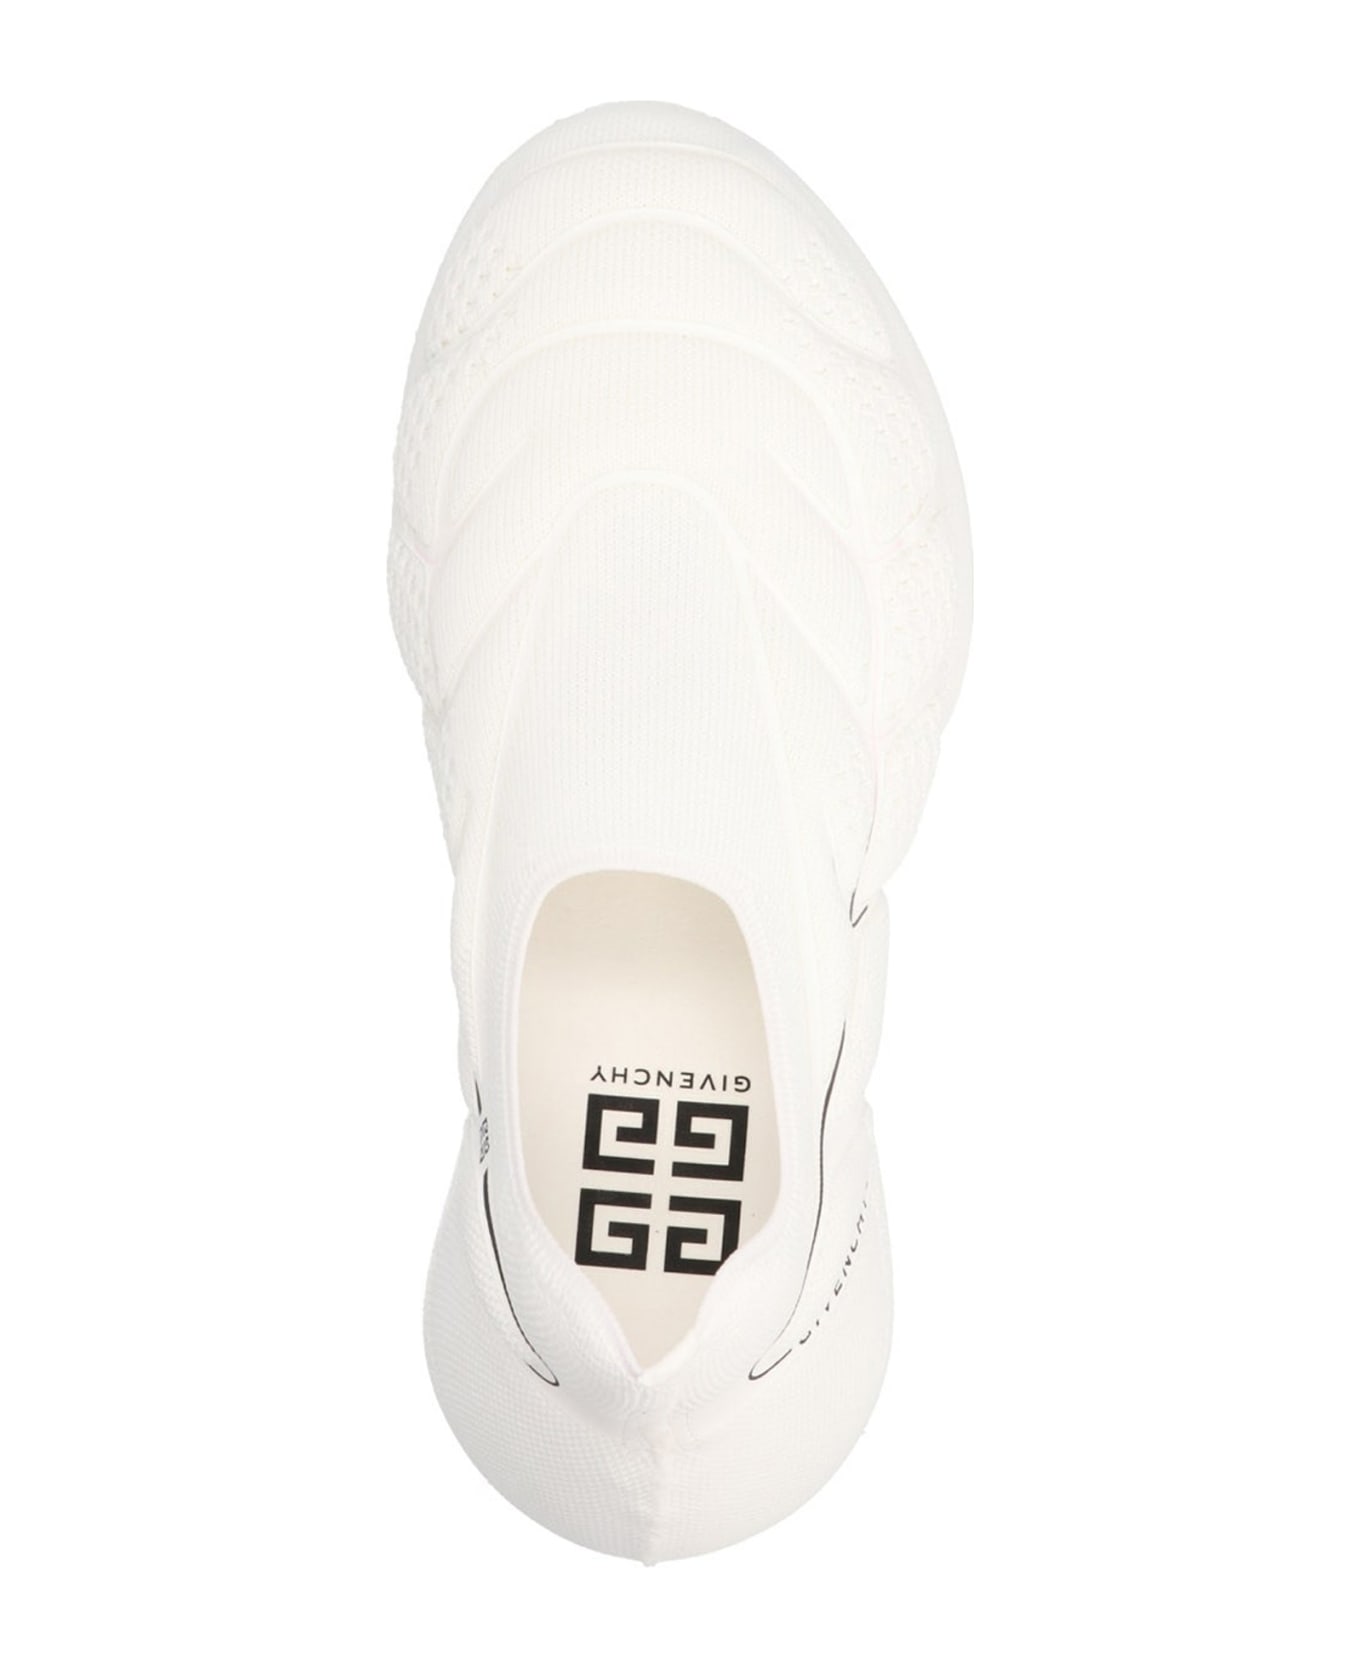 Givenchy Tk-360 Sneakers - White